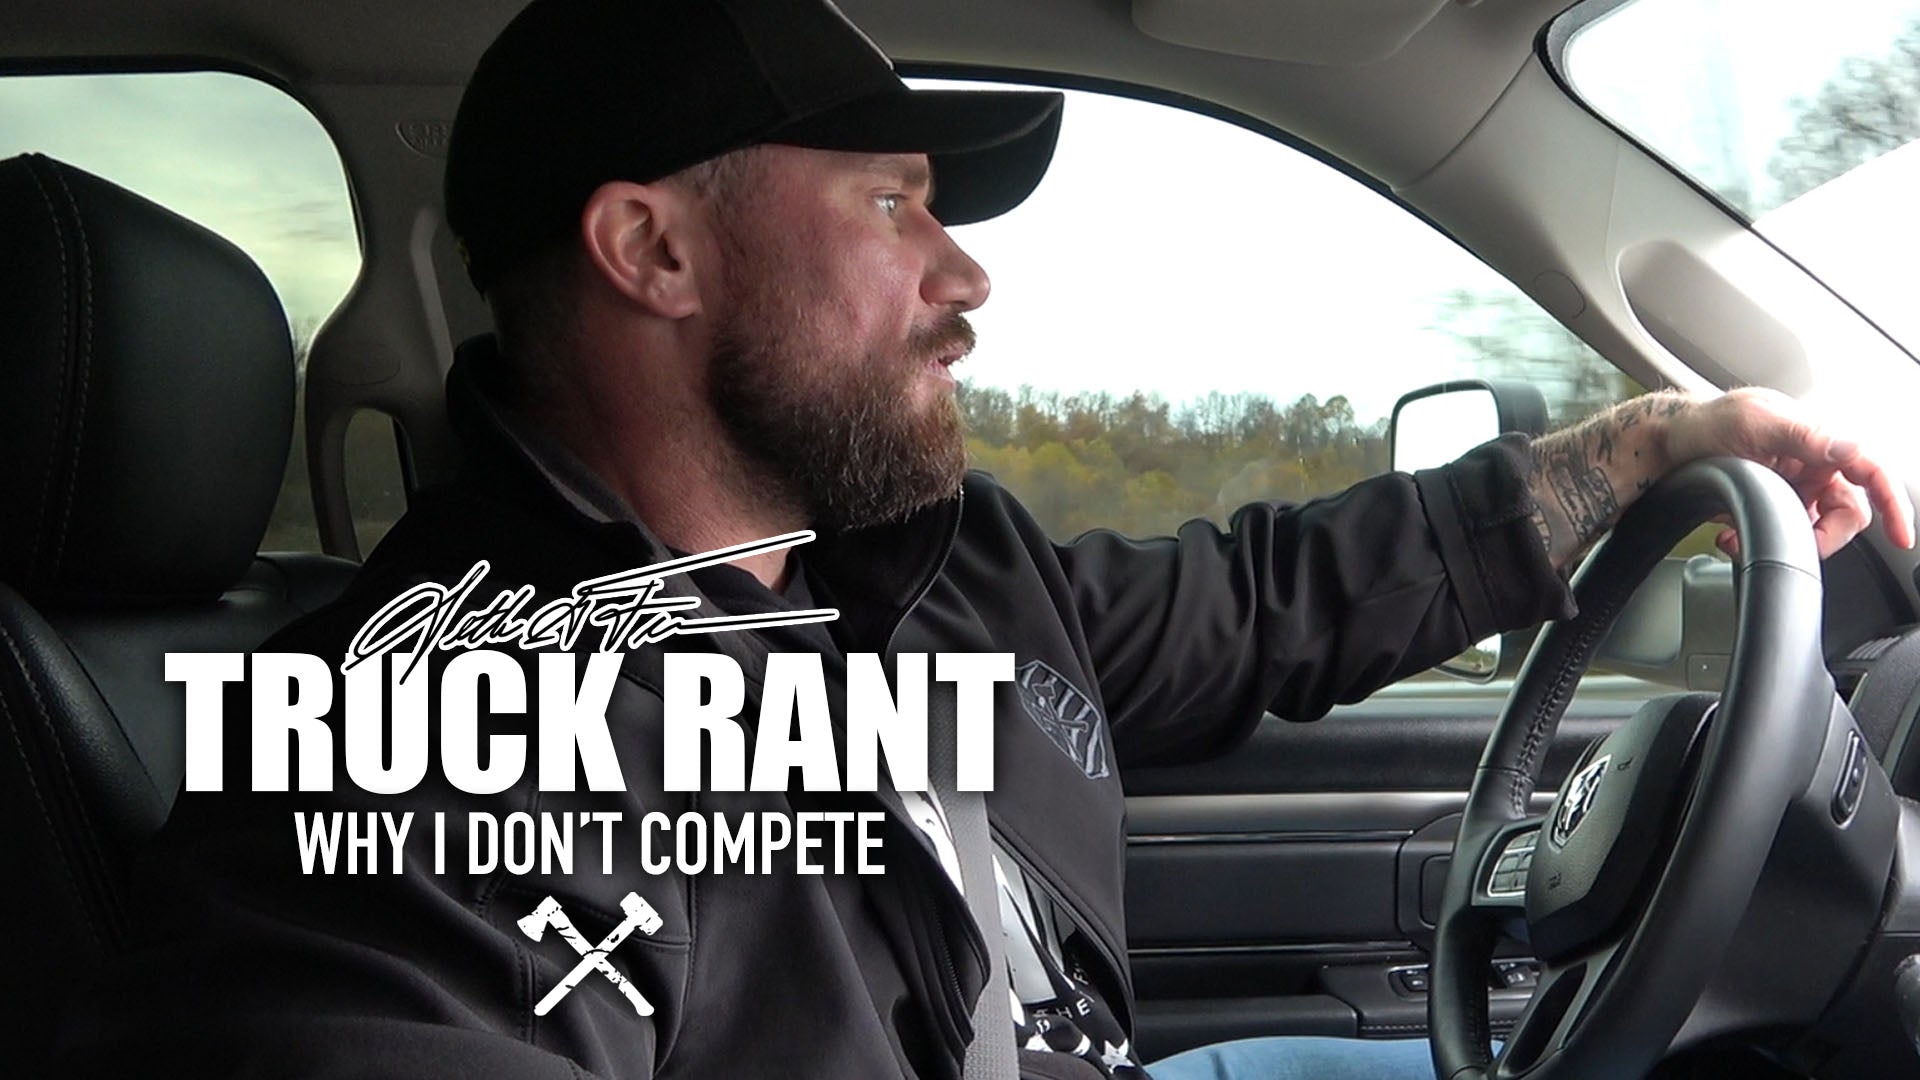 Seth Feroce Truck Rant: Why I Don't Compete